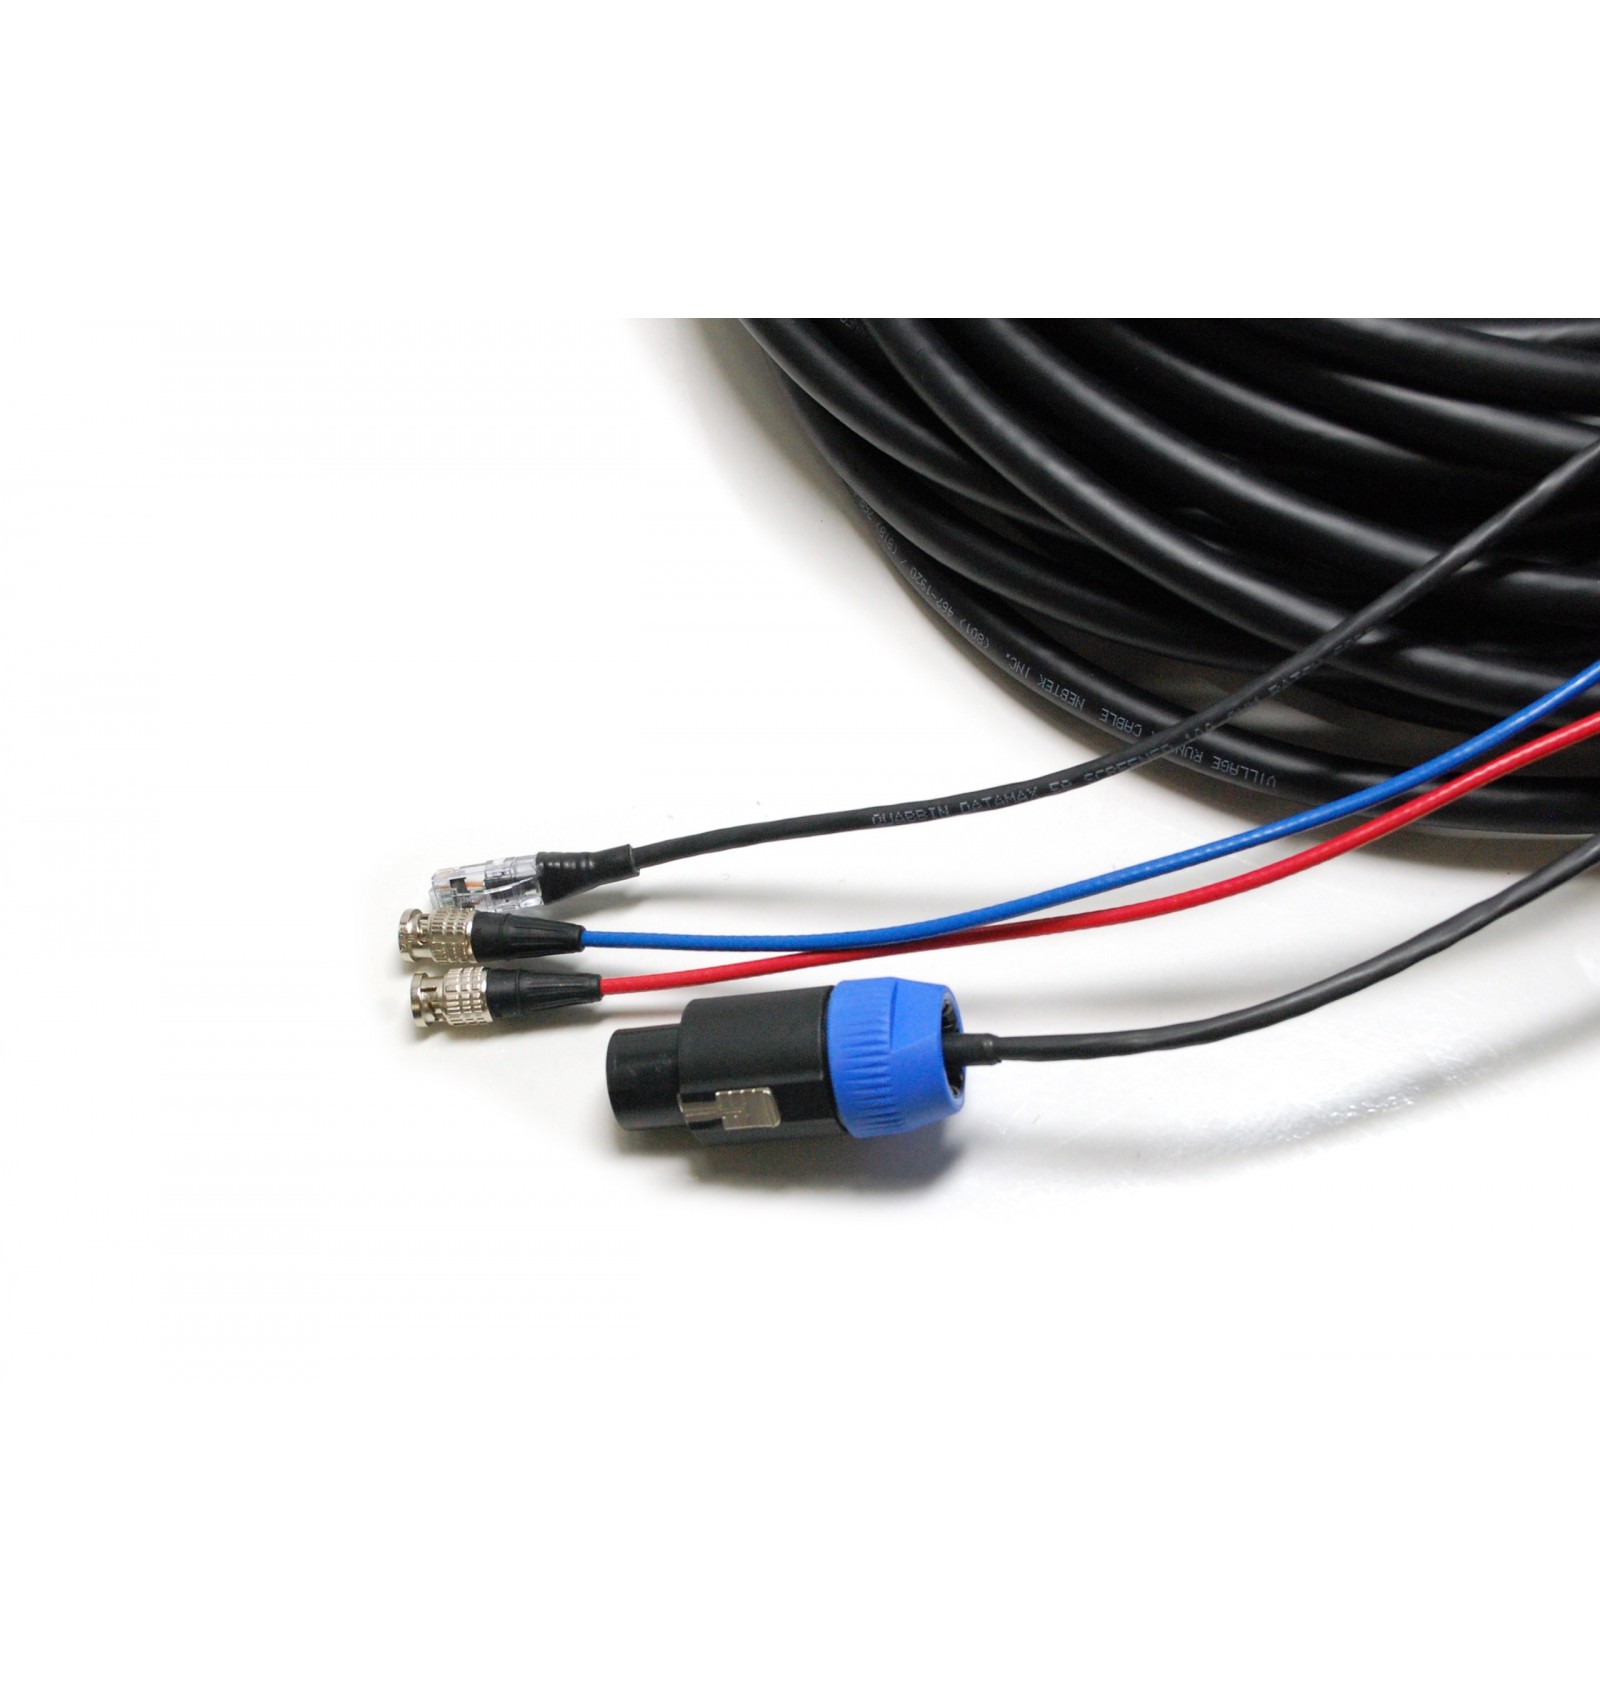 https://store.nebtek.com/2650-thickbox_default/village-runner-cable-with-2-audio-pairs-2-sdi-lines-1-ethernet-and-speakon.jpg